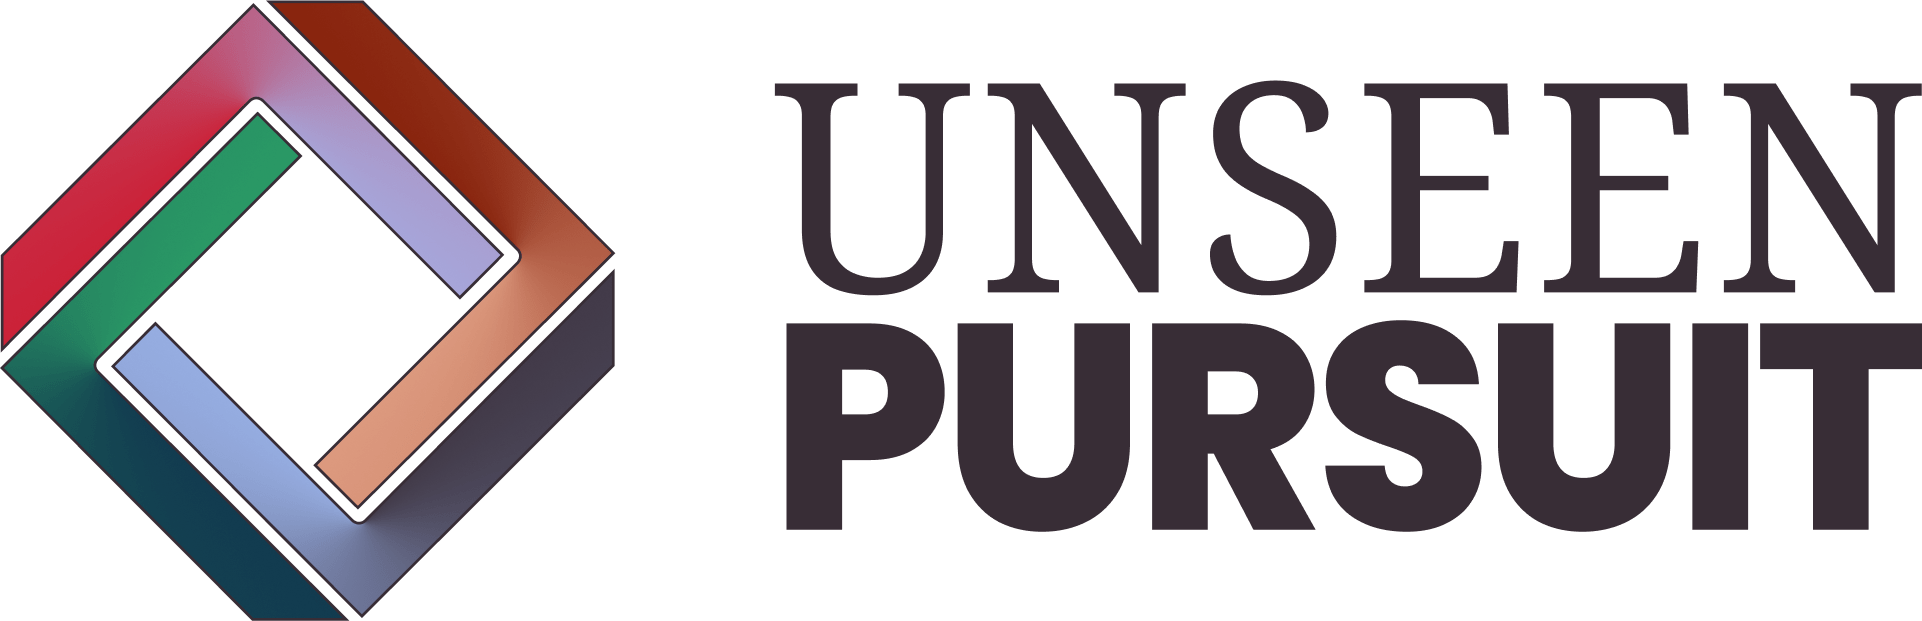 Unseen Pursuit logo in color with a transparent background